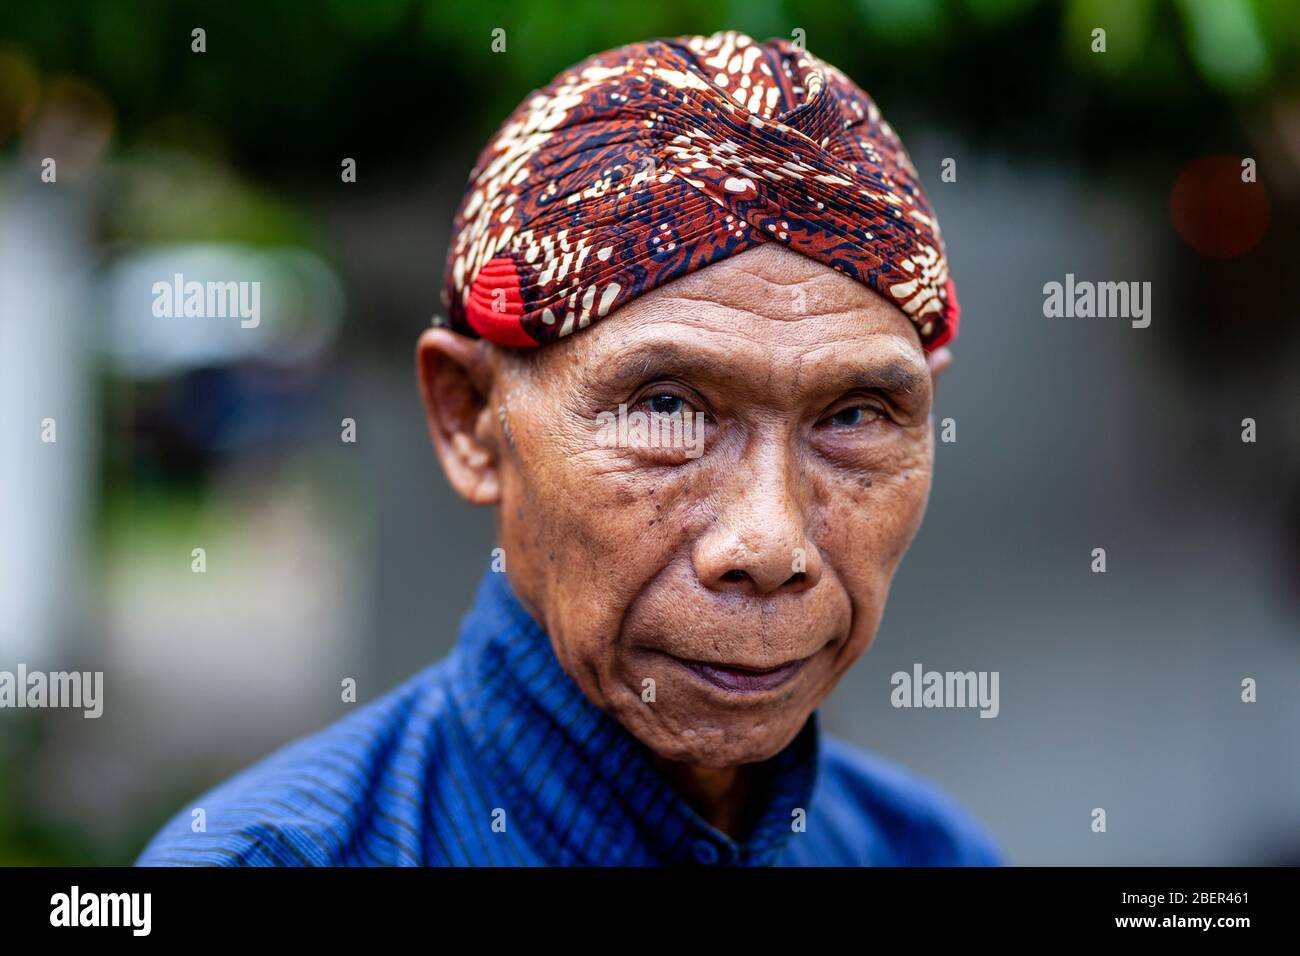 A Portrait Of A Gamelin (Traditional Indonesian Orchestre) Performer At A Traditional Dance Performance, The Sultan’s Palace, Yogyakarta, Indonesia. Stock Photo